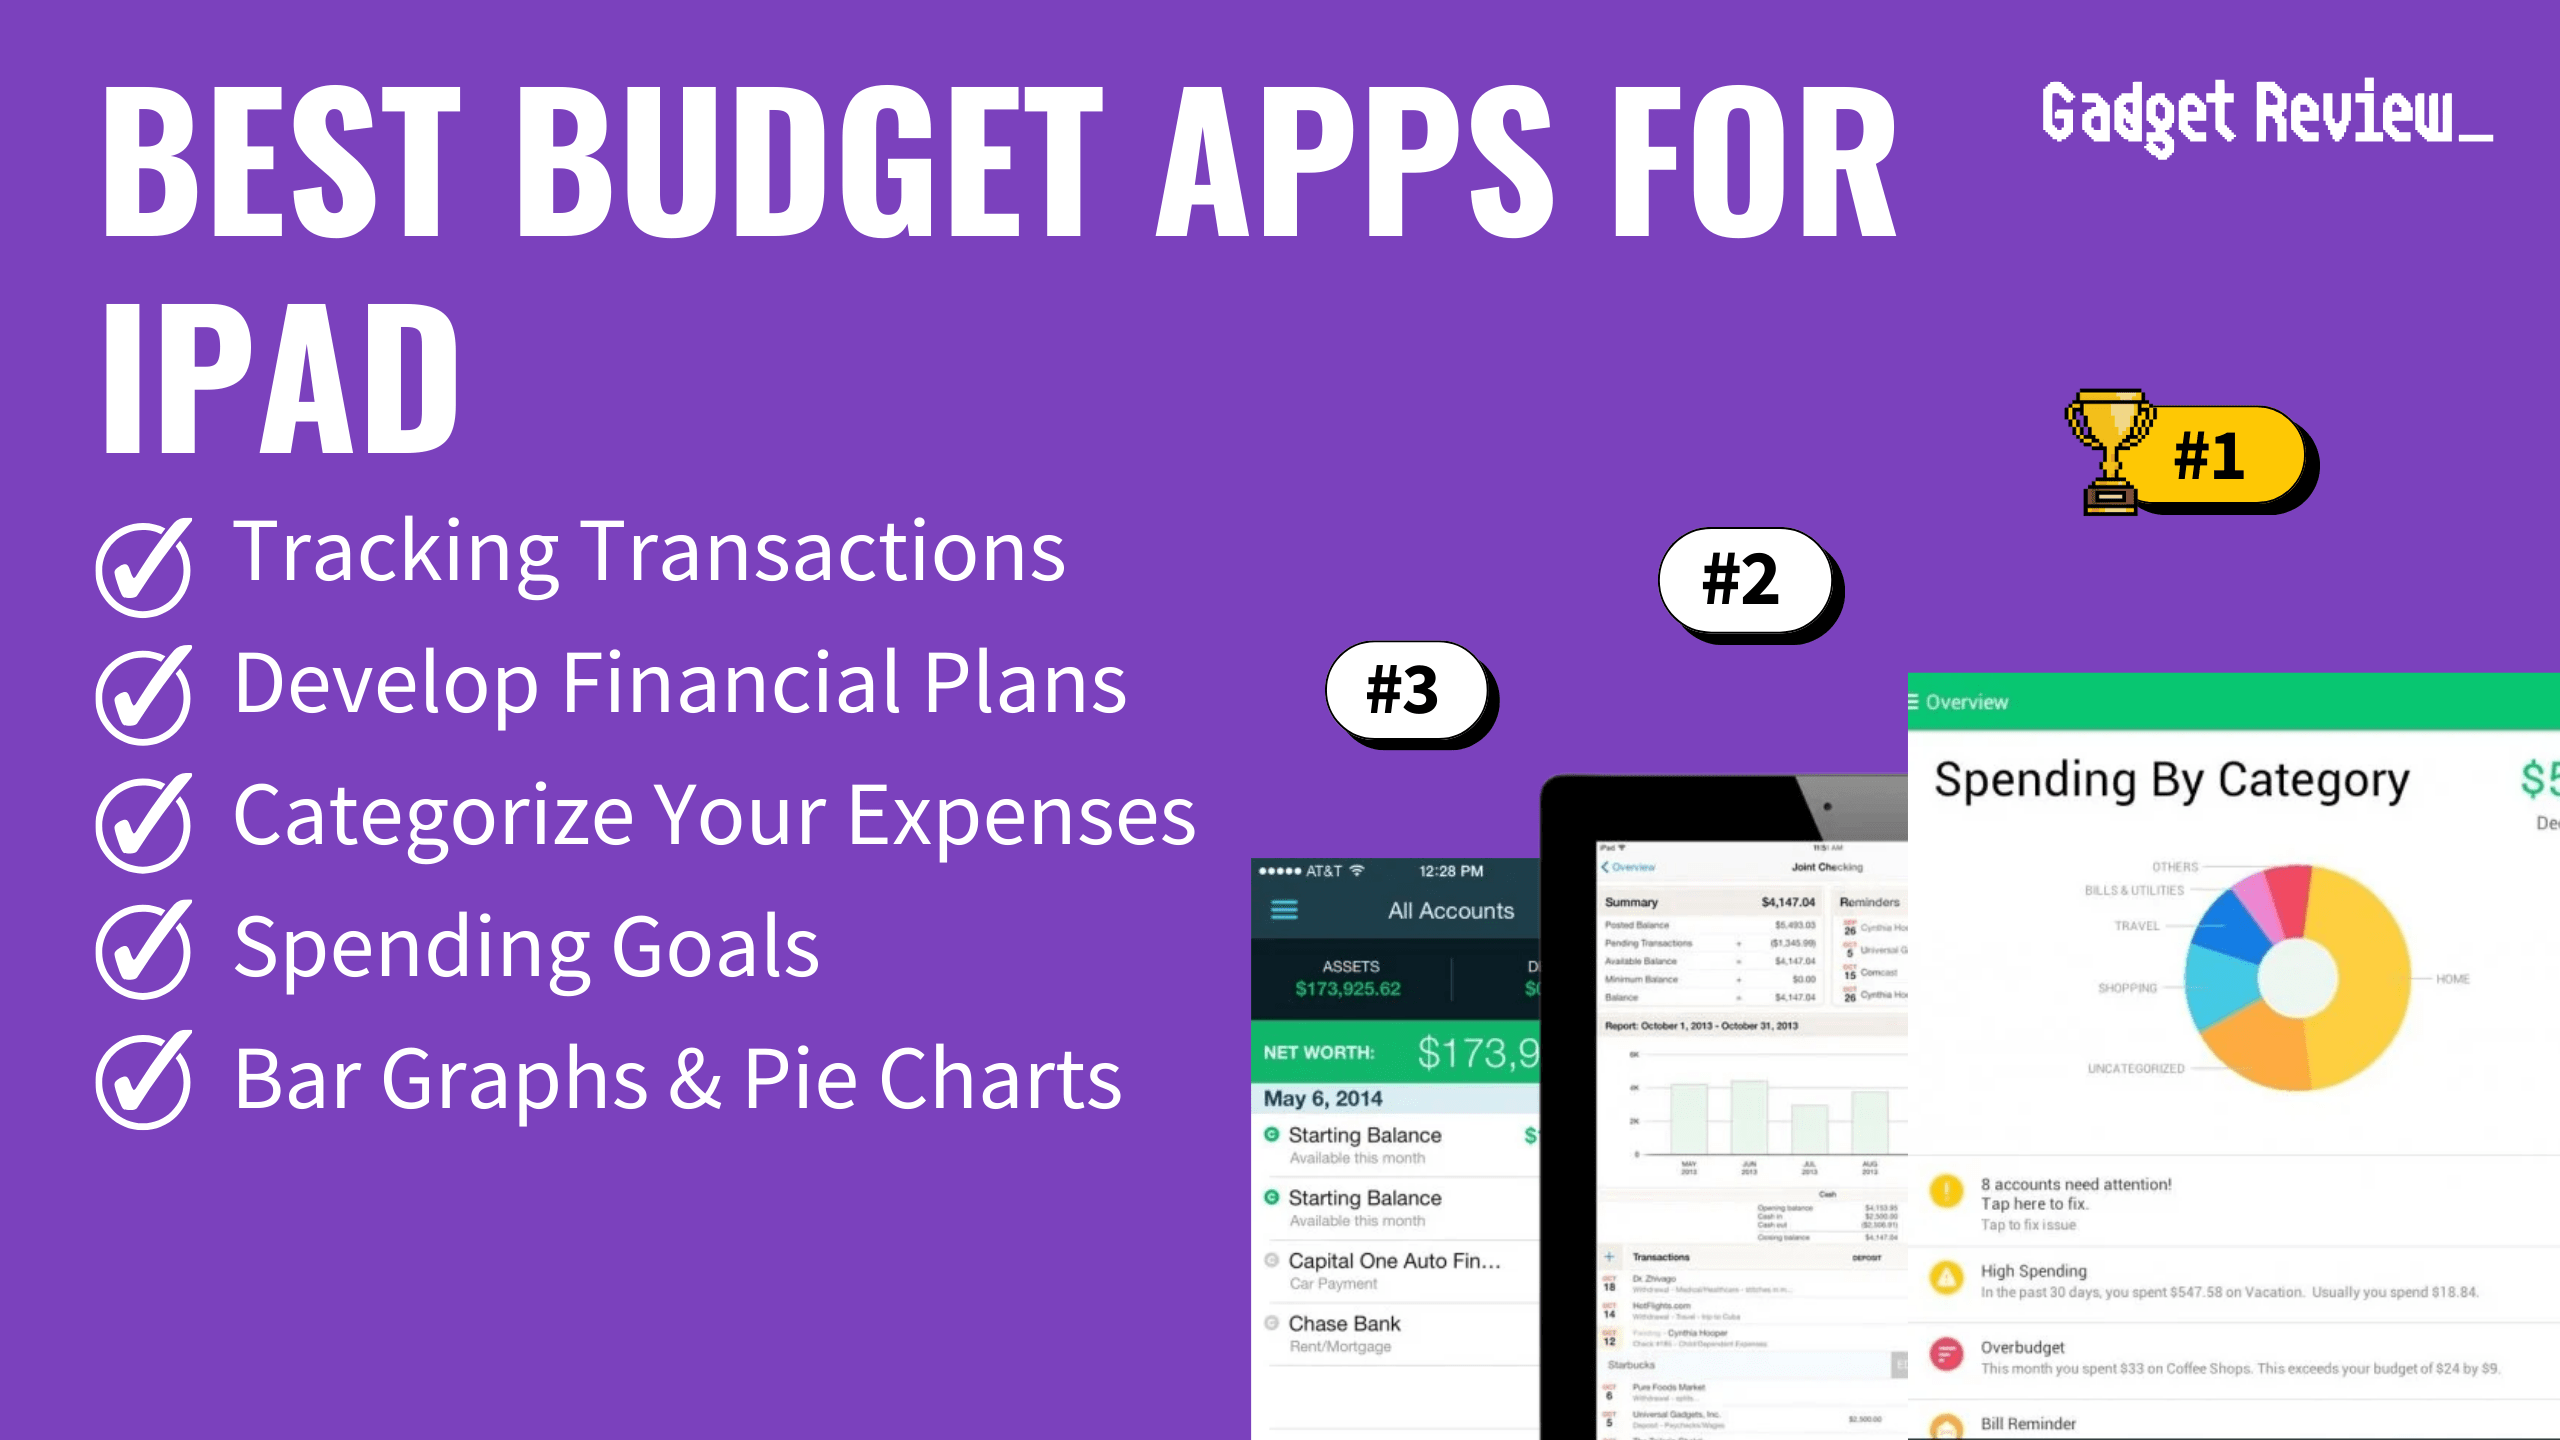 Best Budget Apps for iPad